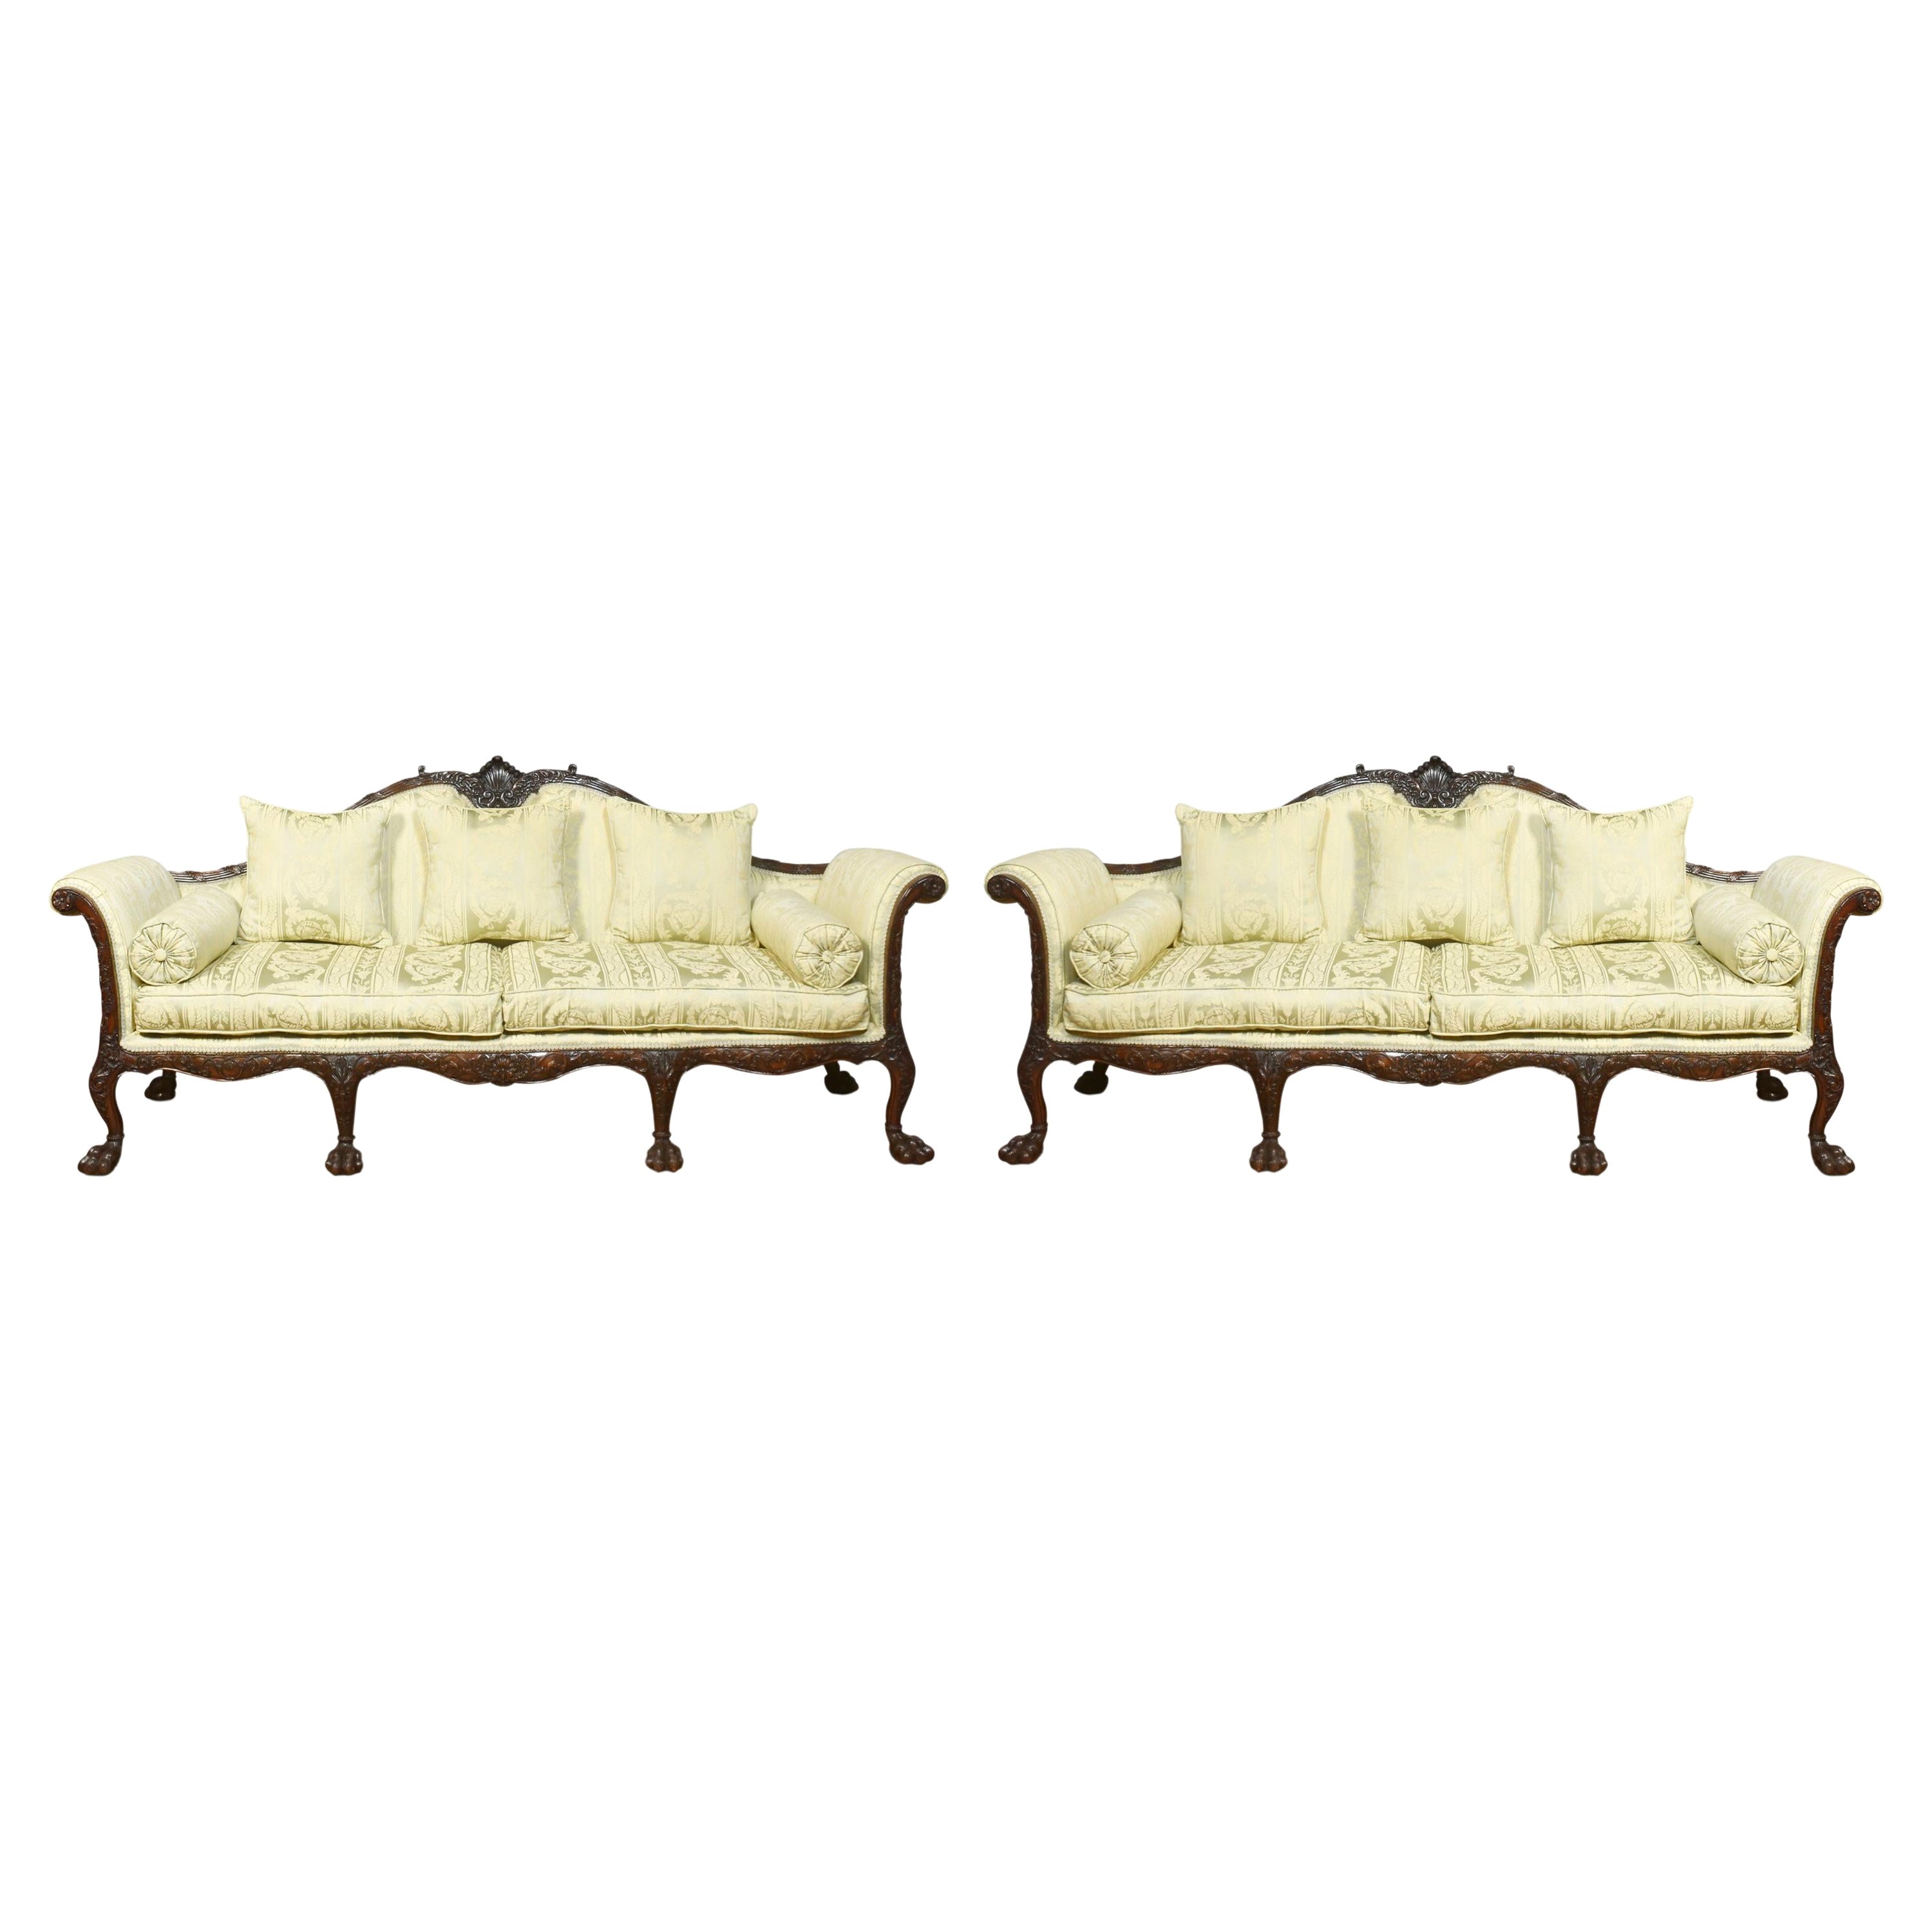 Pair of Chippendale Revival Settees